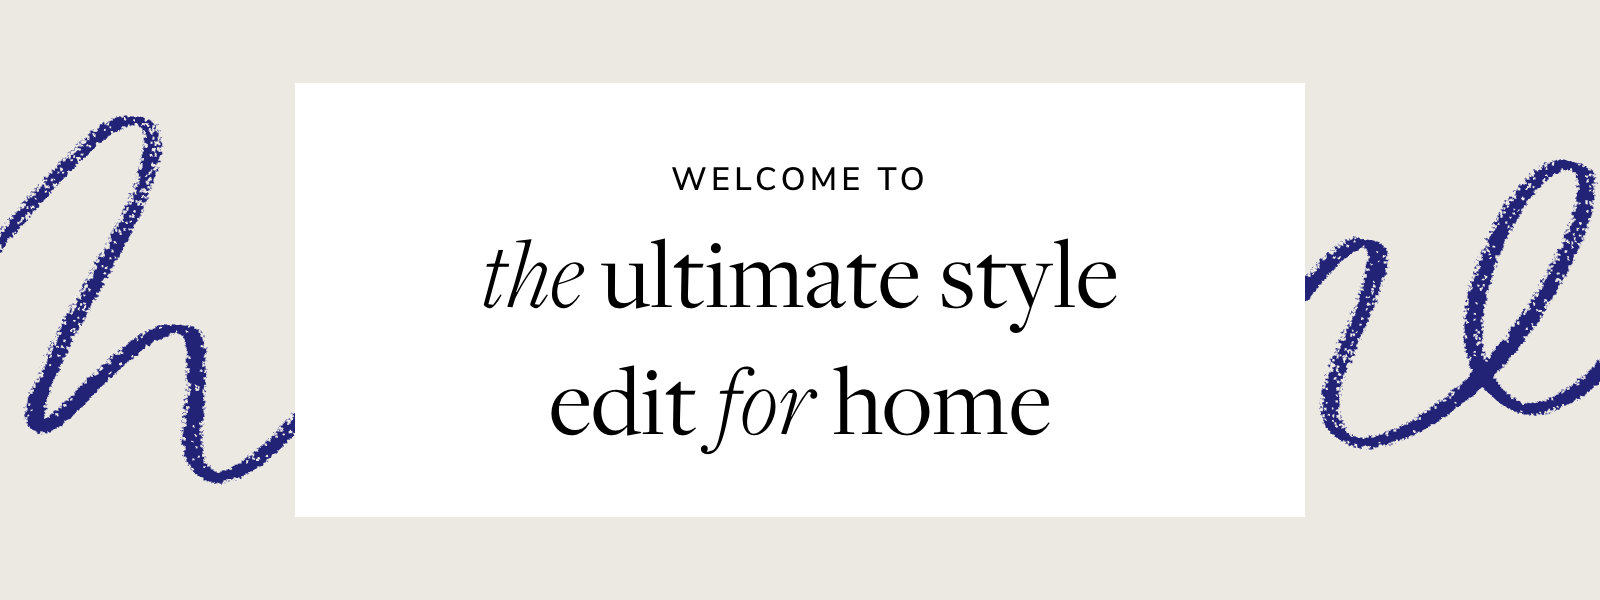 welcome to the ultimate style edit for home